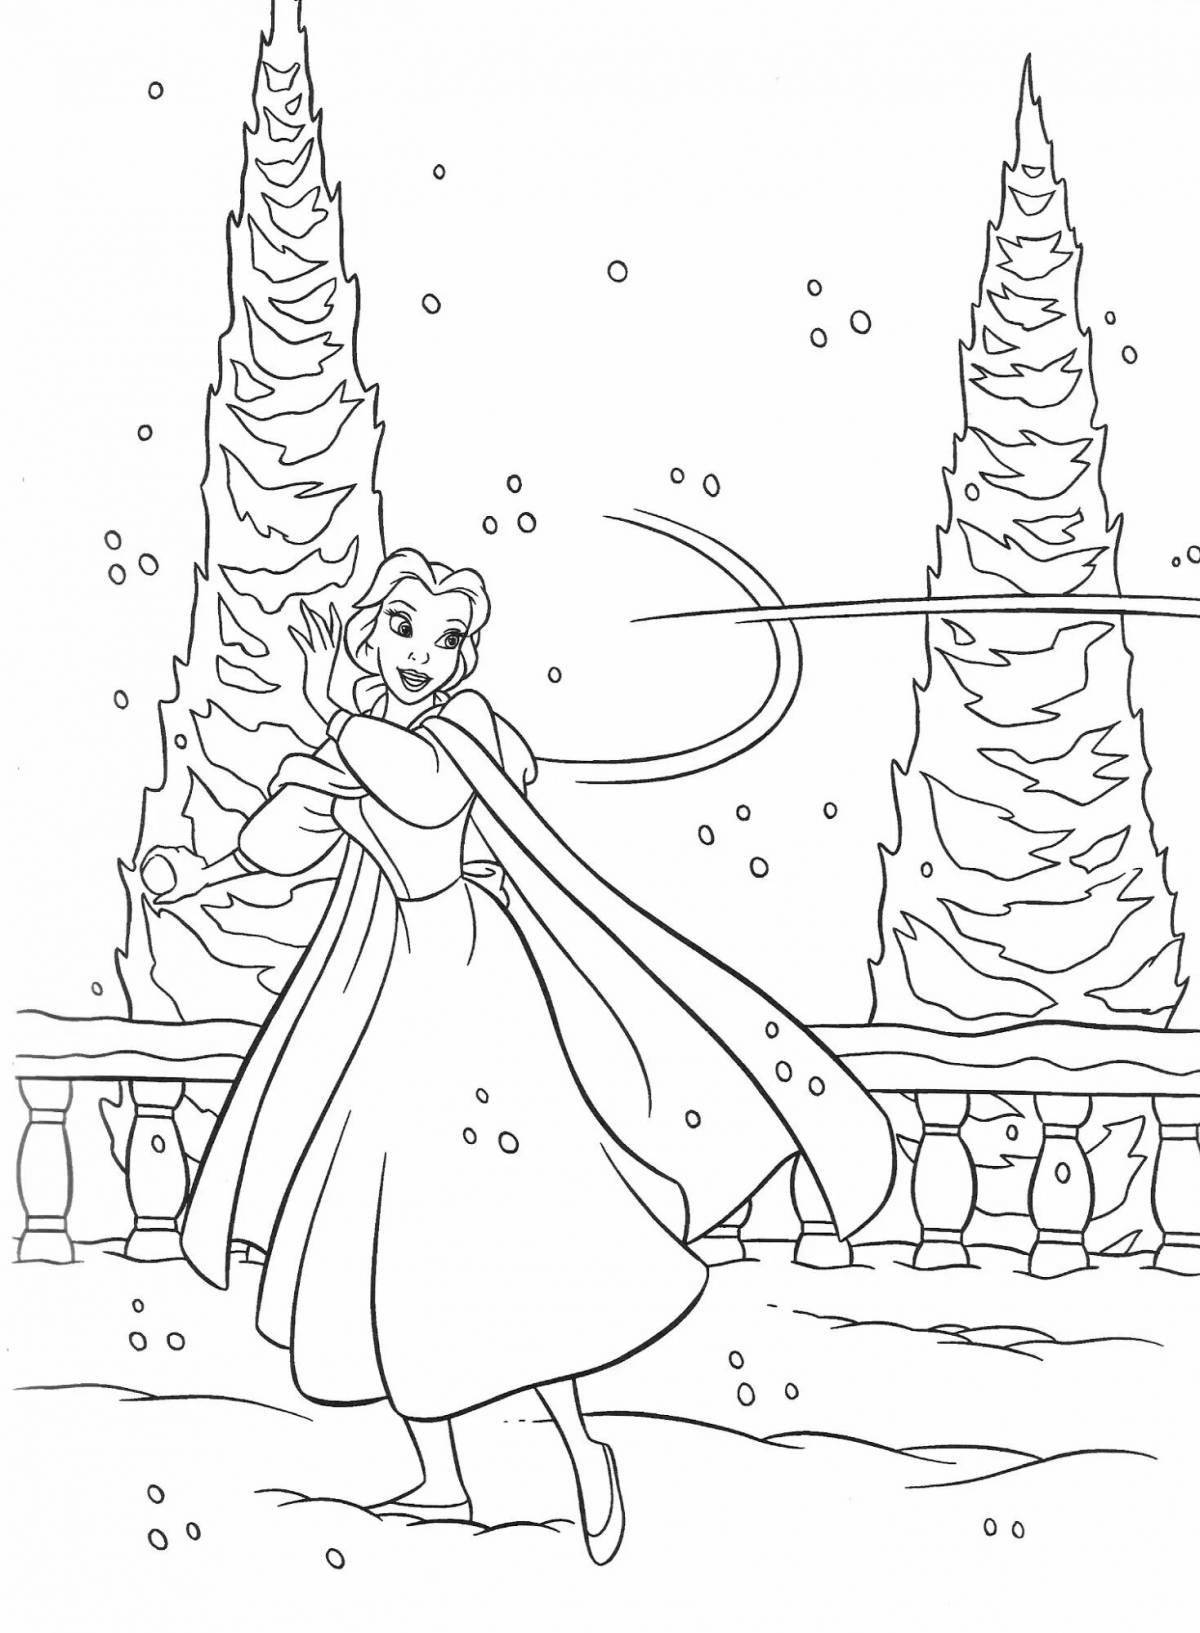 Charming snow queen coloring book for girls